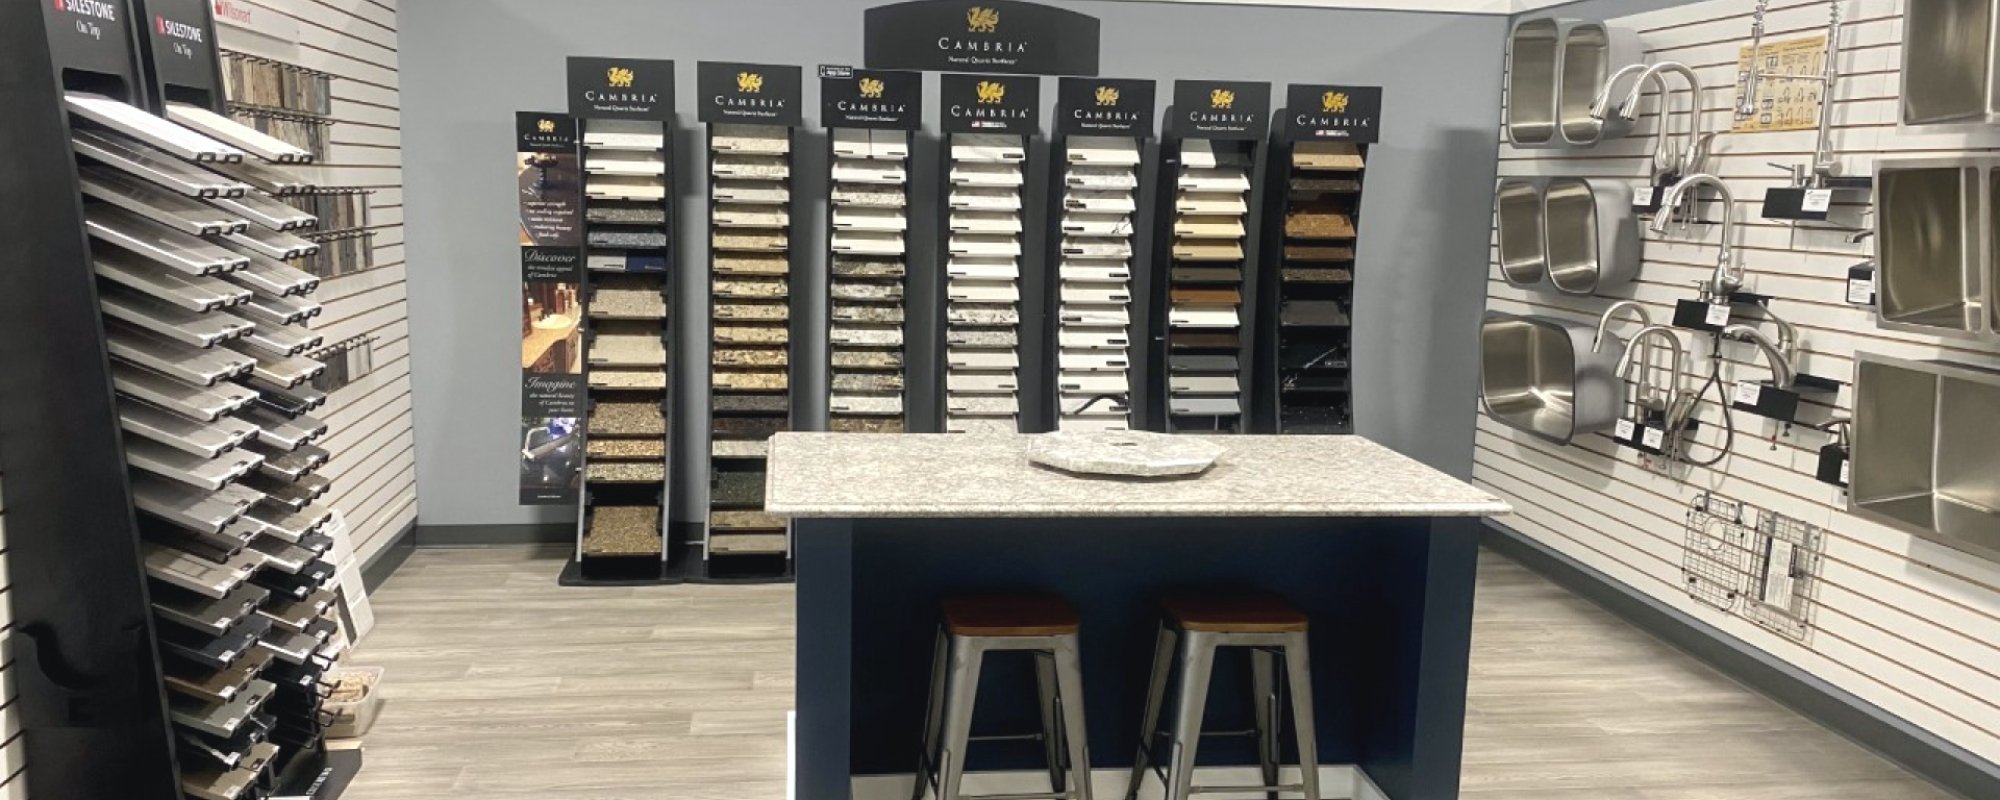 Tile section from showroom - Taylorville Home Source in Taylorville